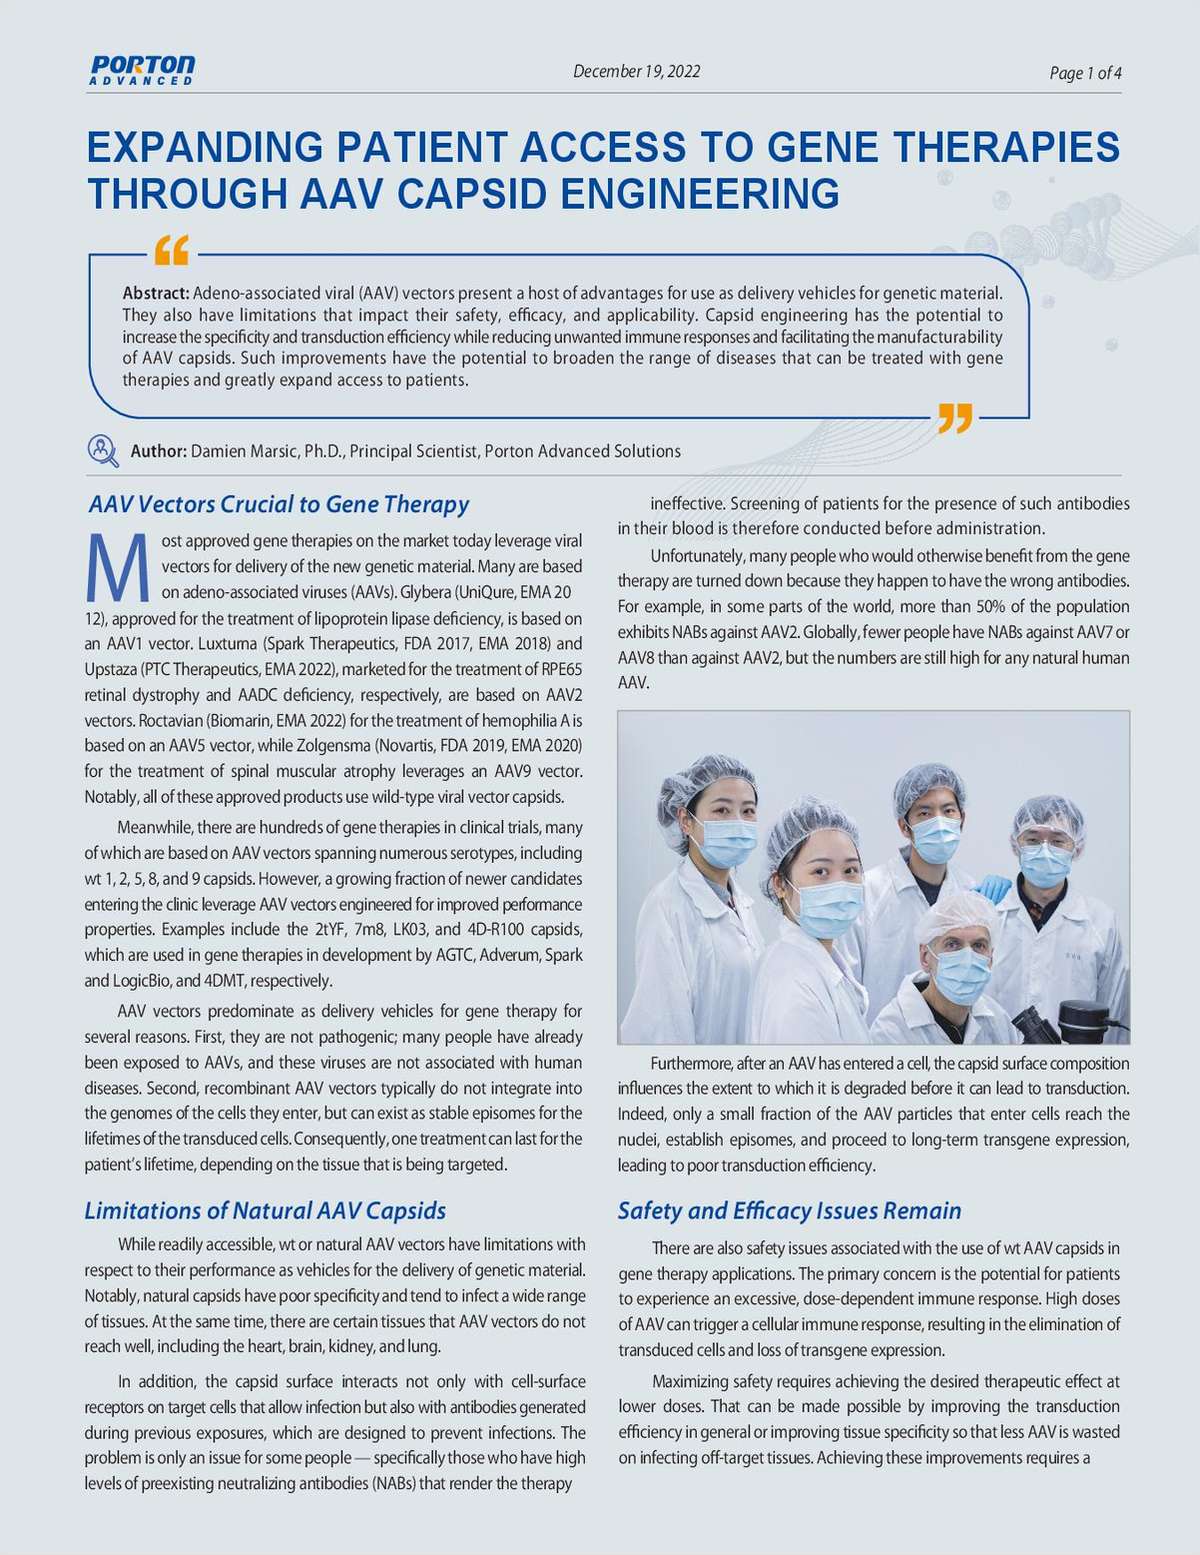 Expanding Patient Access to Gene Therapies Through AAV Capsid Engineering